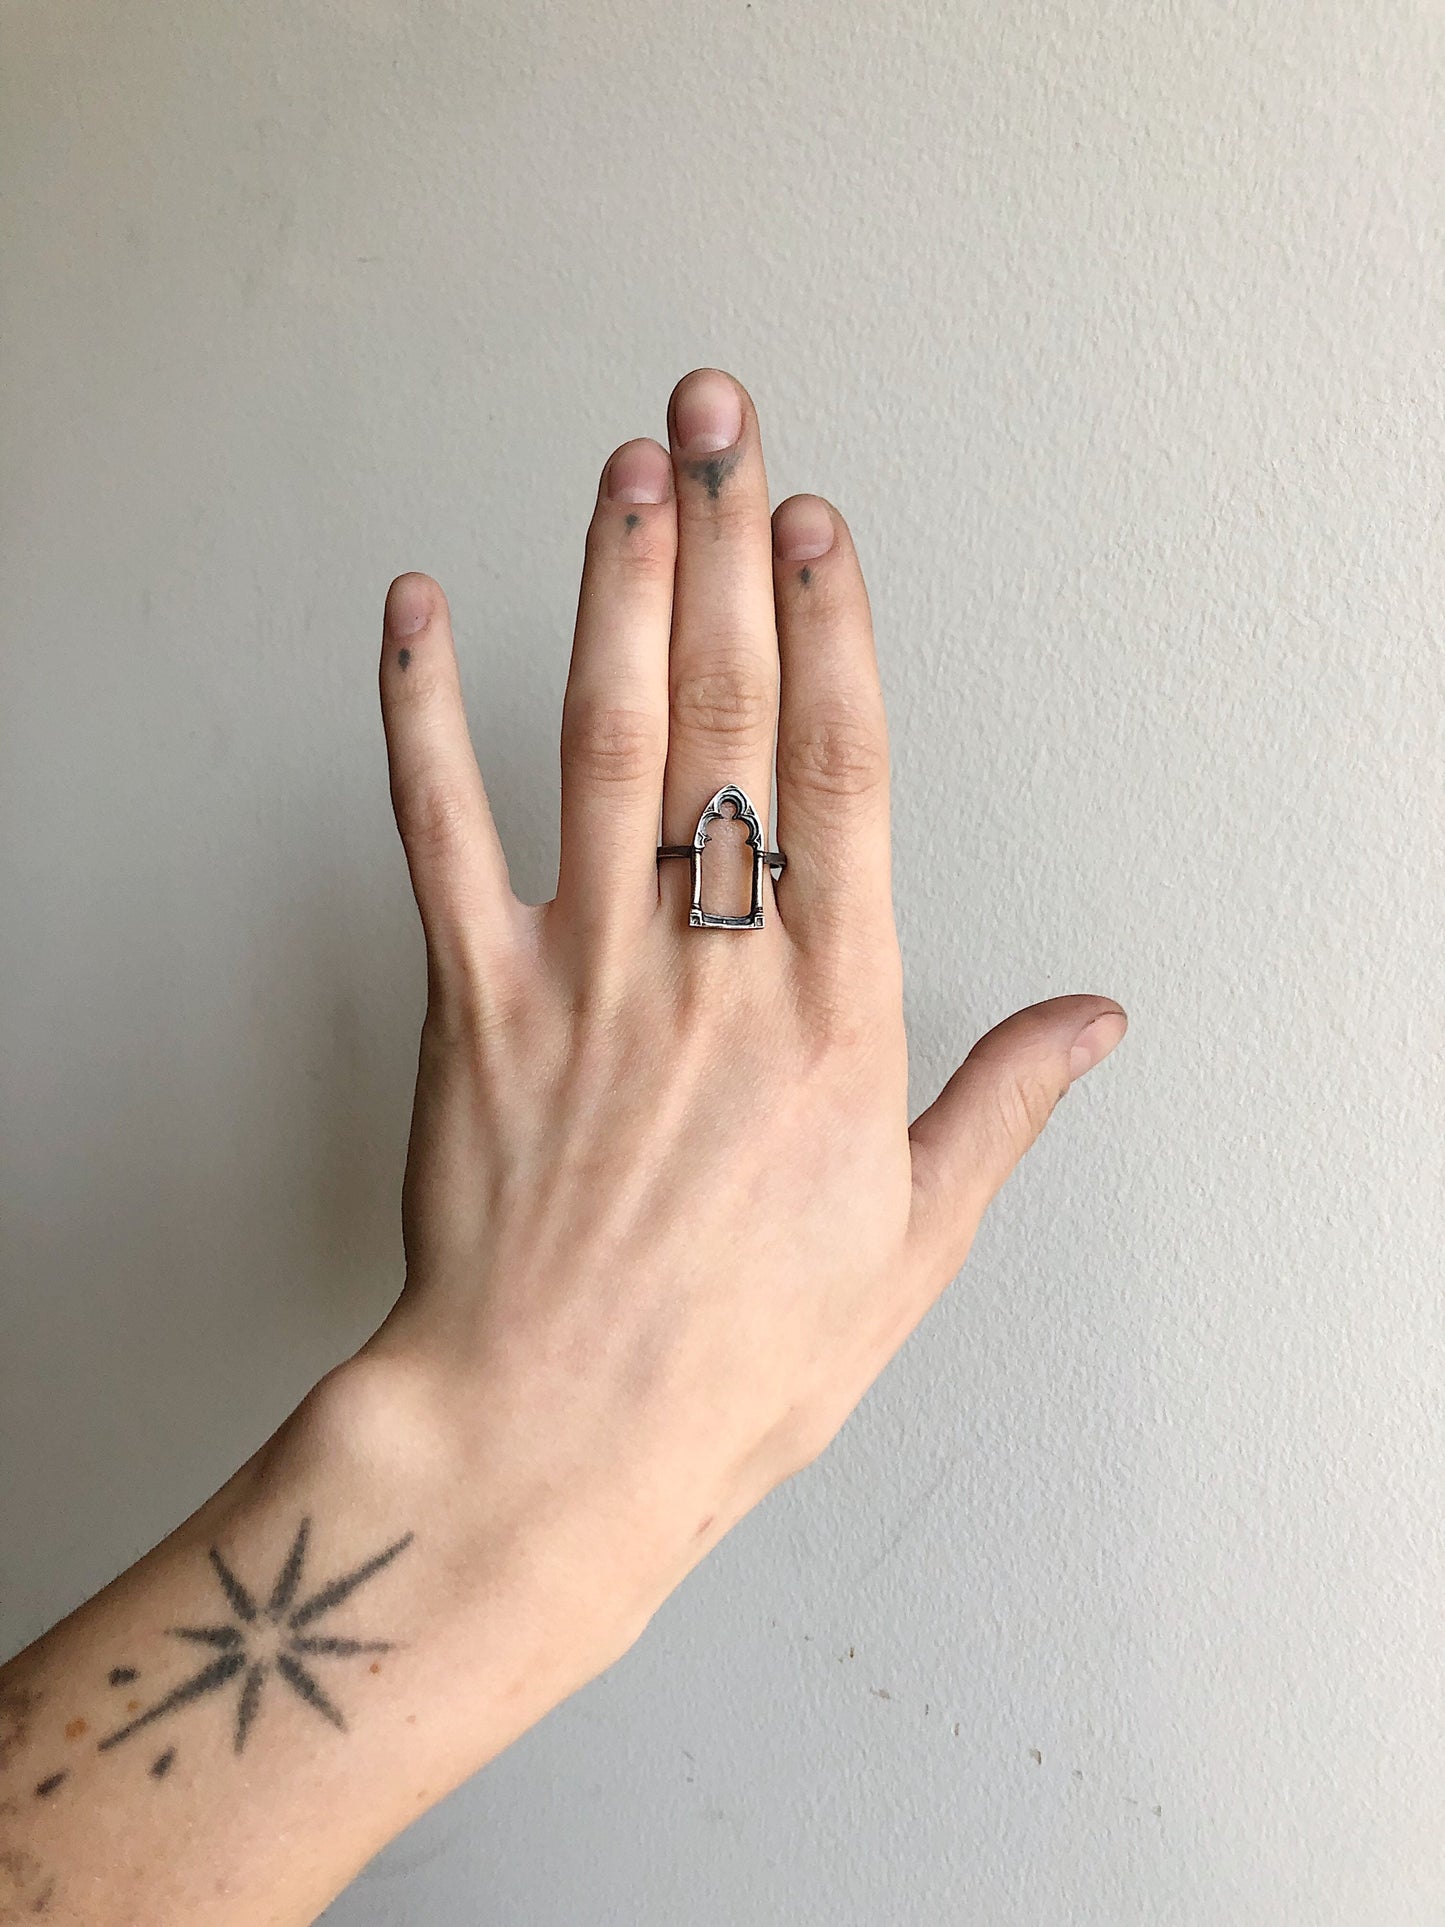 The Open Window // Small // Ring